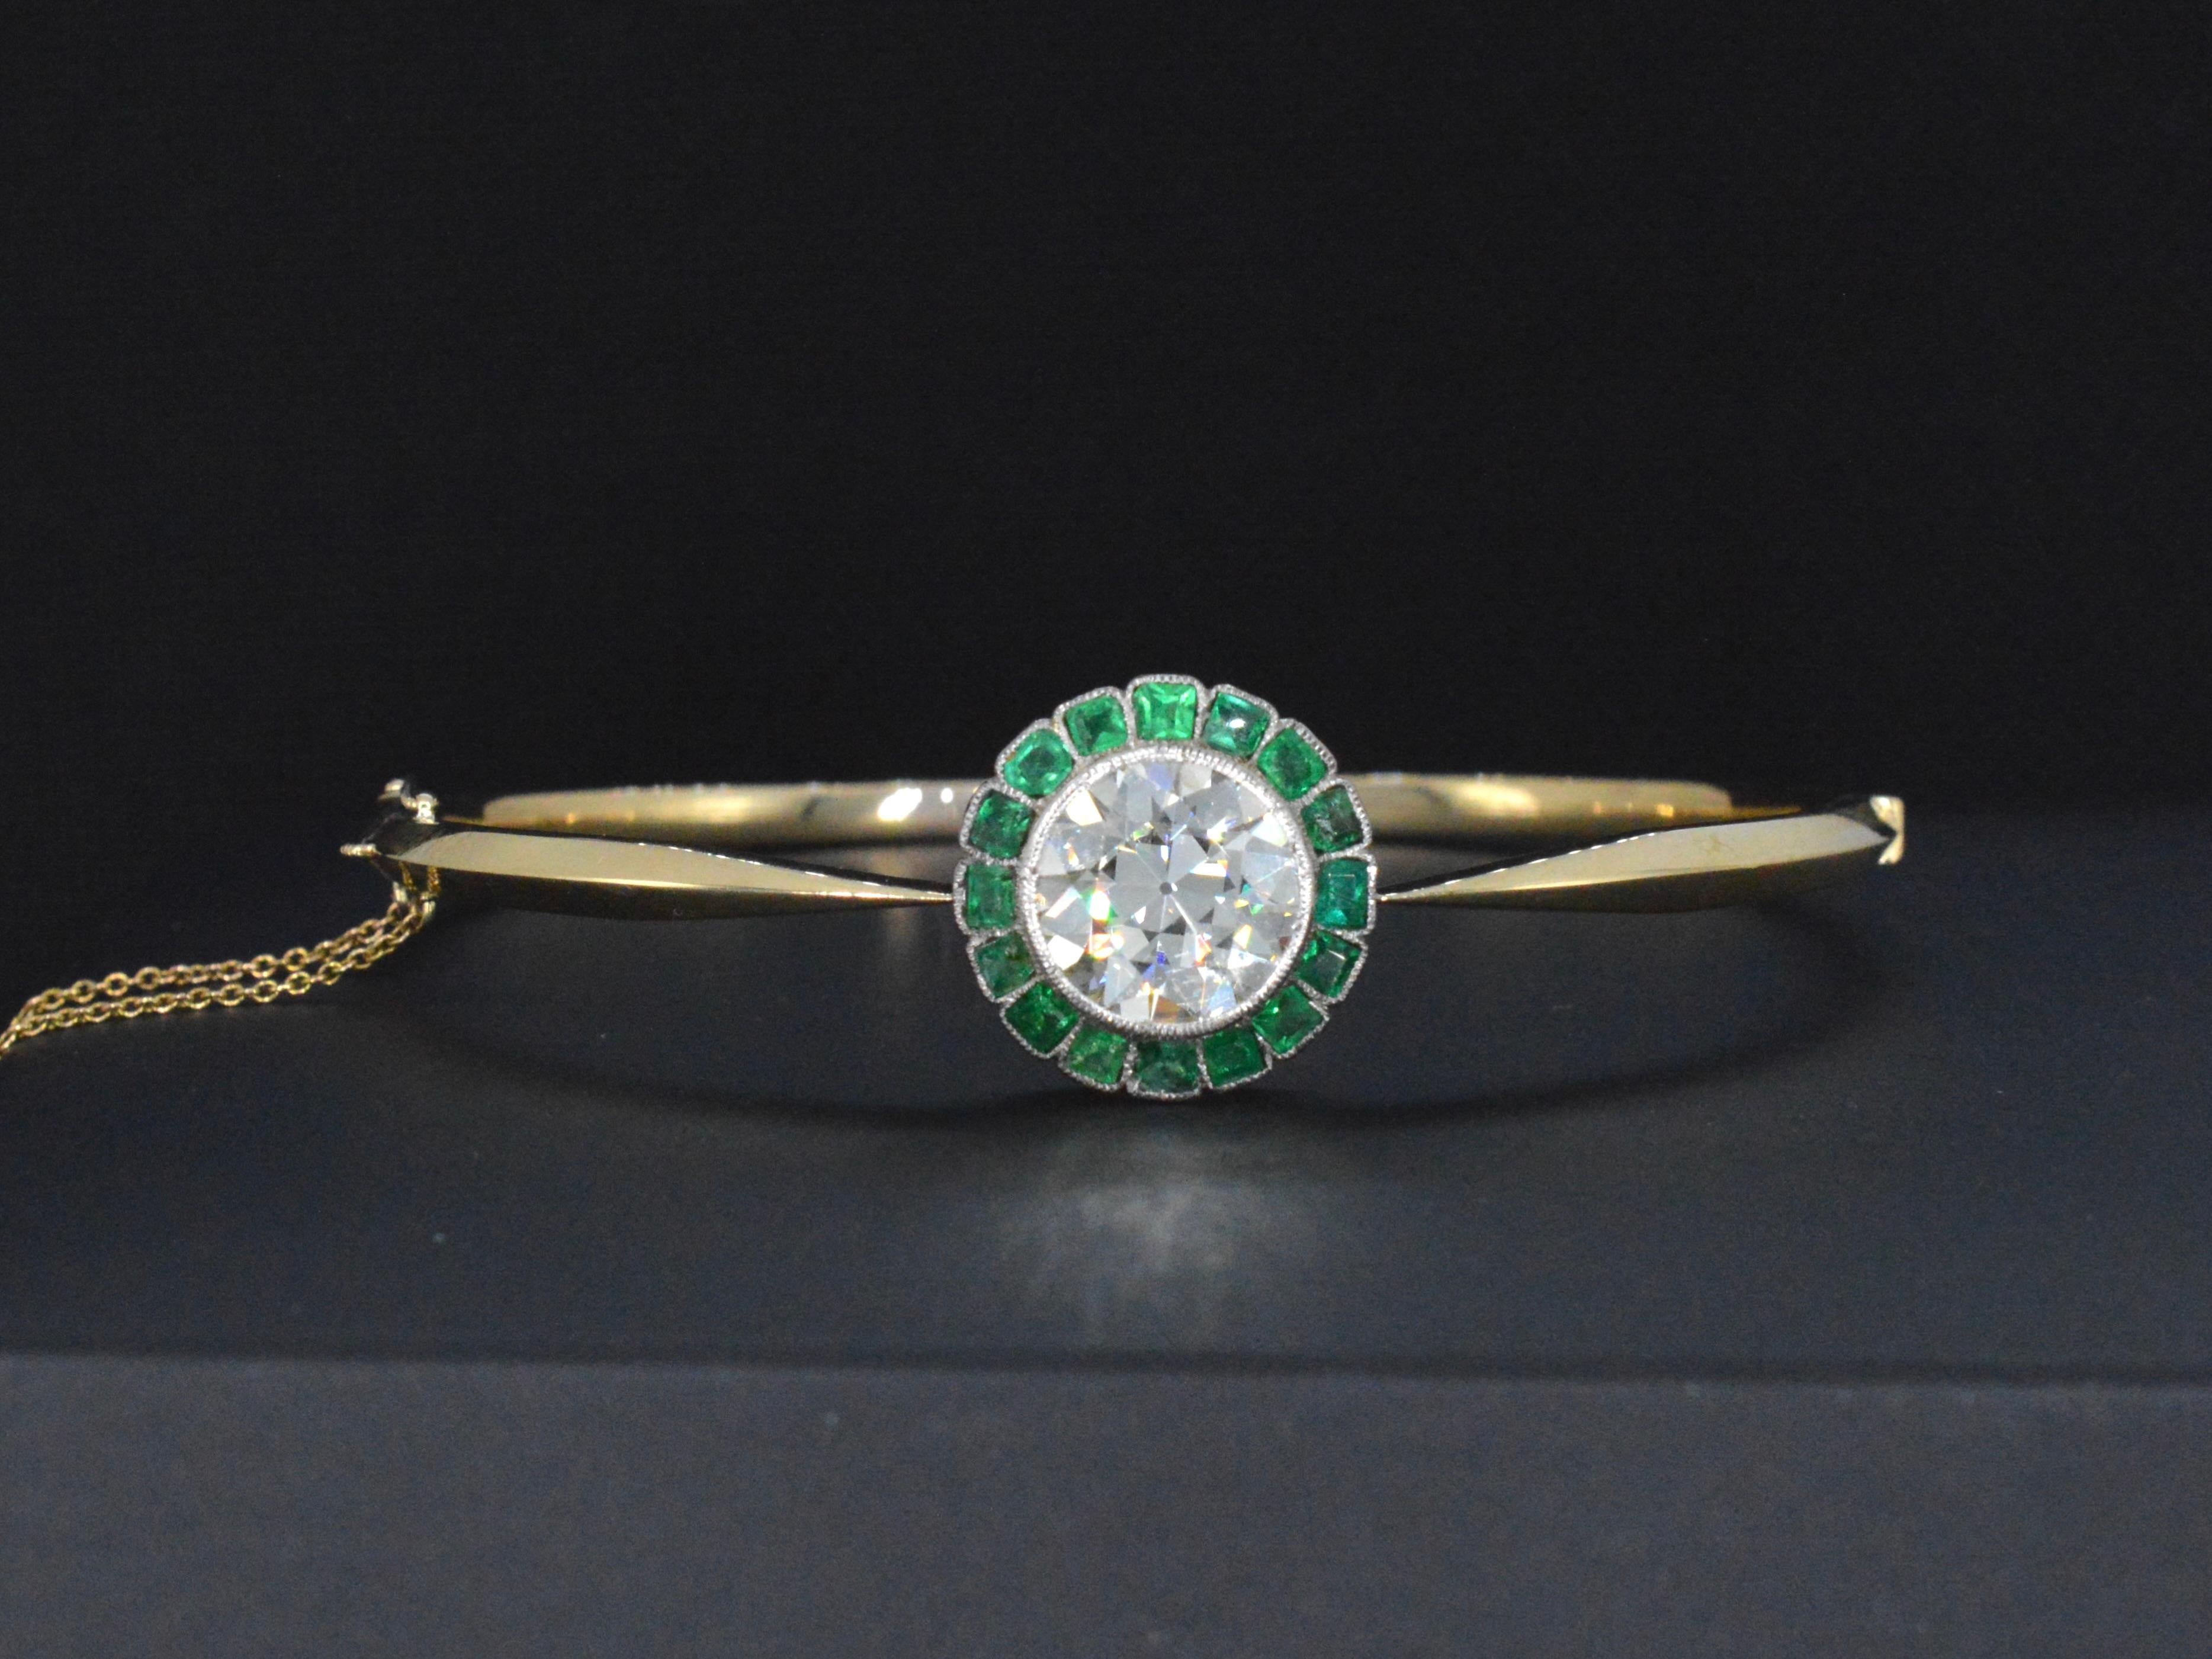 Introducing our extraordinary vintage bracelet, a true masterpiece of elegance and sophistication. This remarkable piece features a breathtaking combination of a 4.50-carat transitional-cut diamond and a 1.50-carat square-cut emerald. The diamond